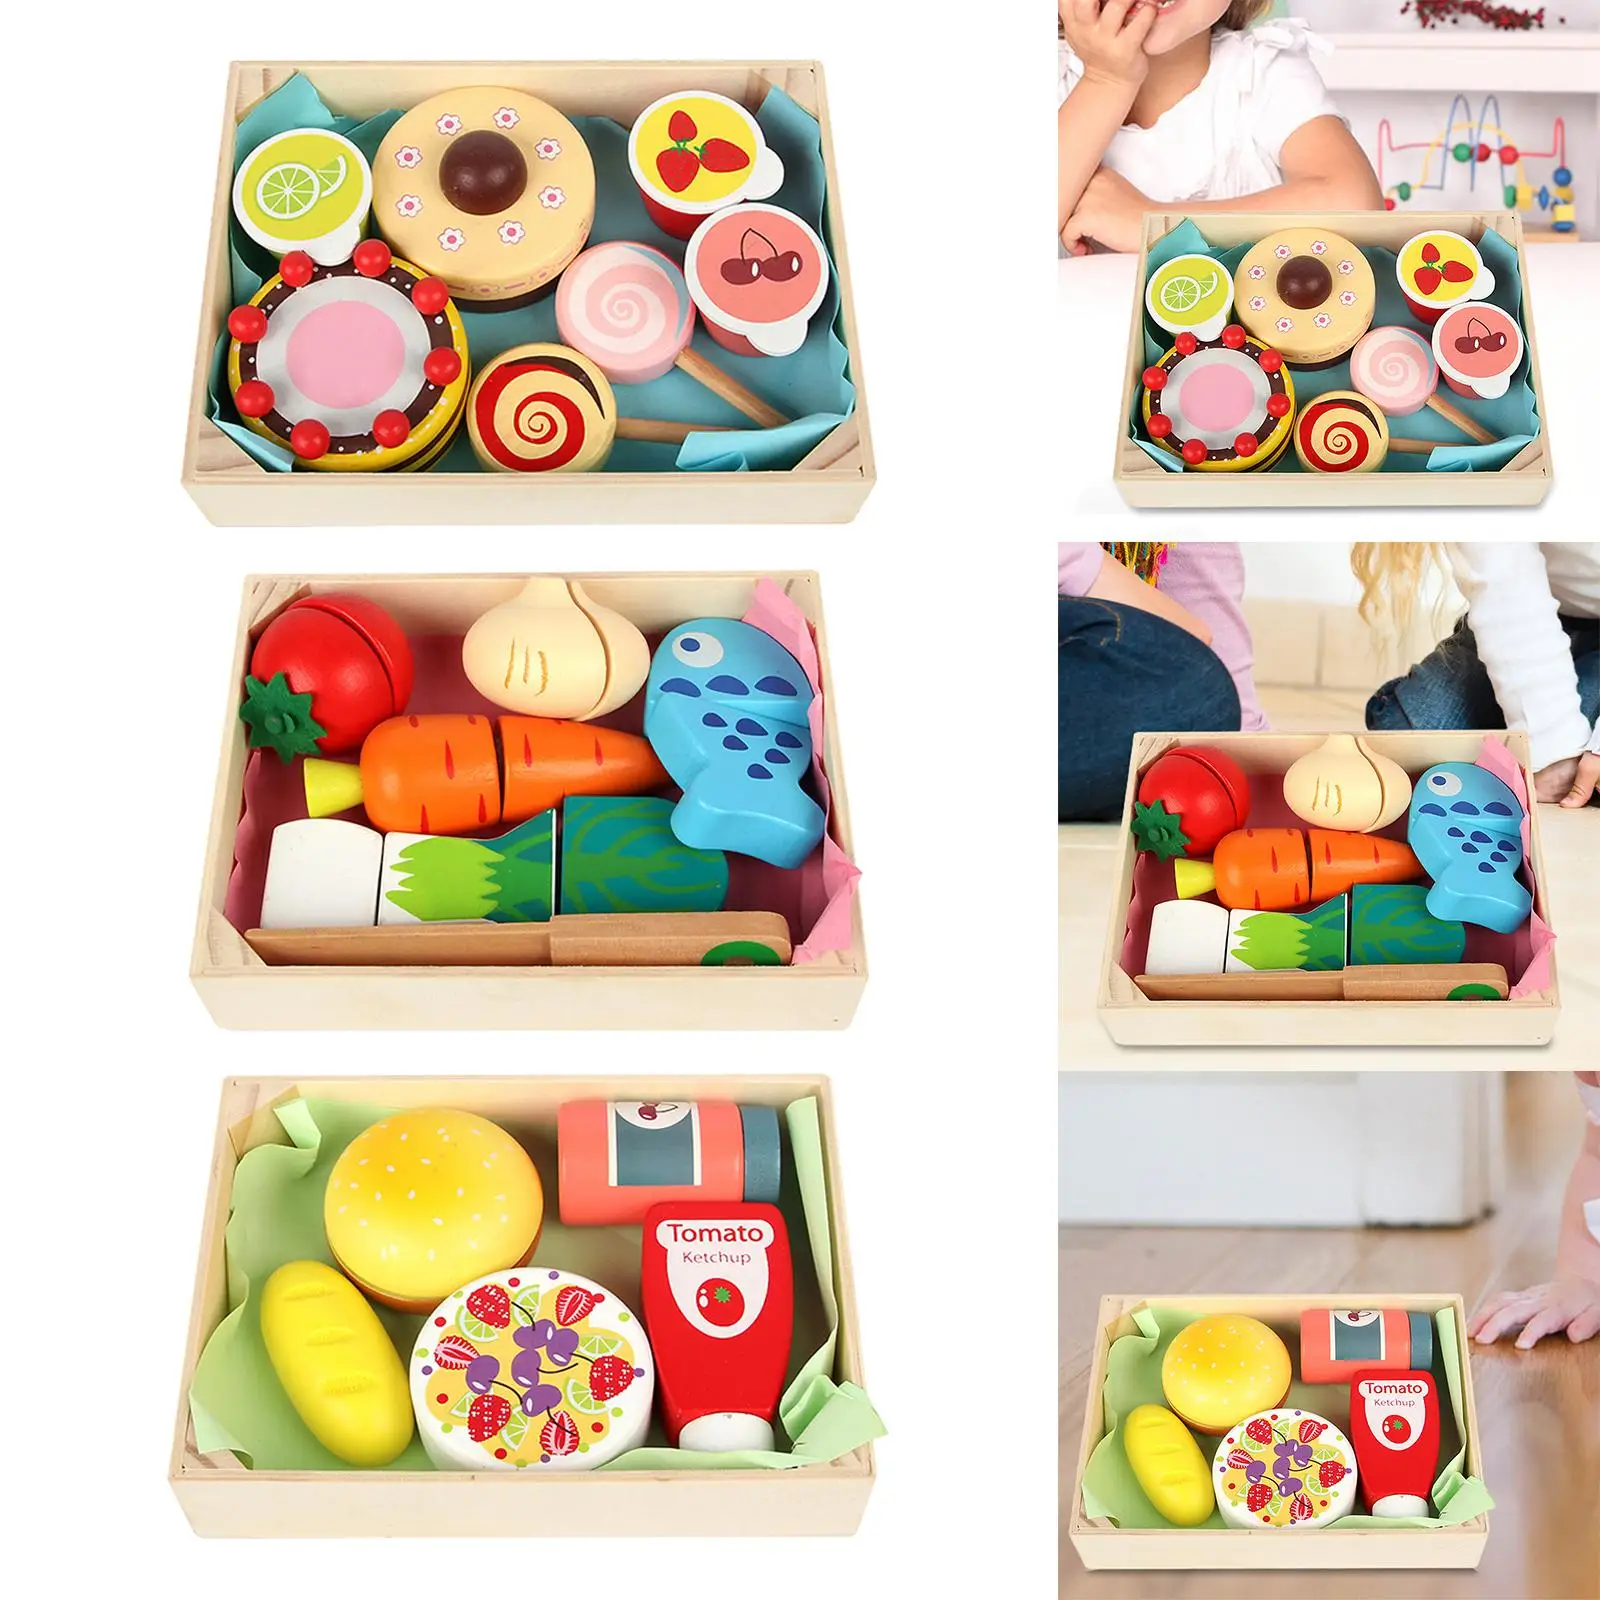 Food Hands on Ability Educational Toys for Girls Kids Birthday Gifts